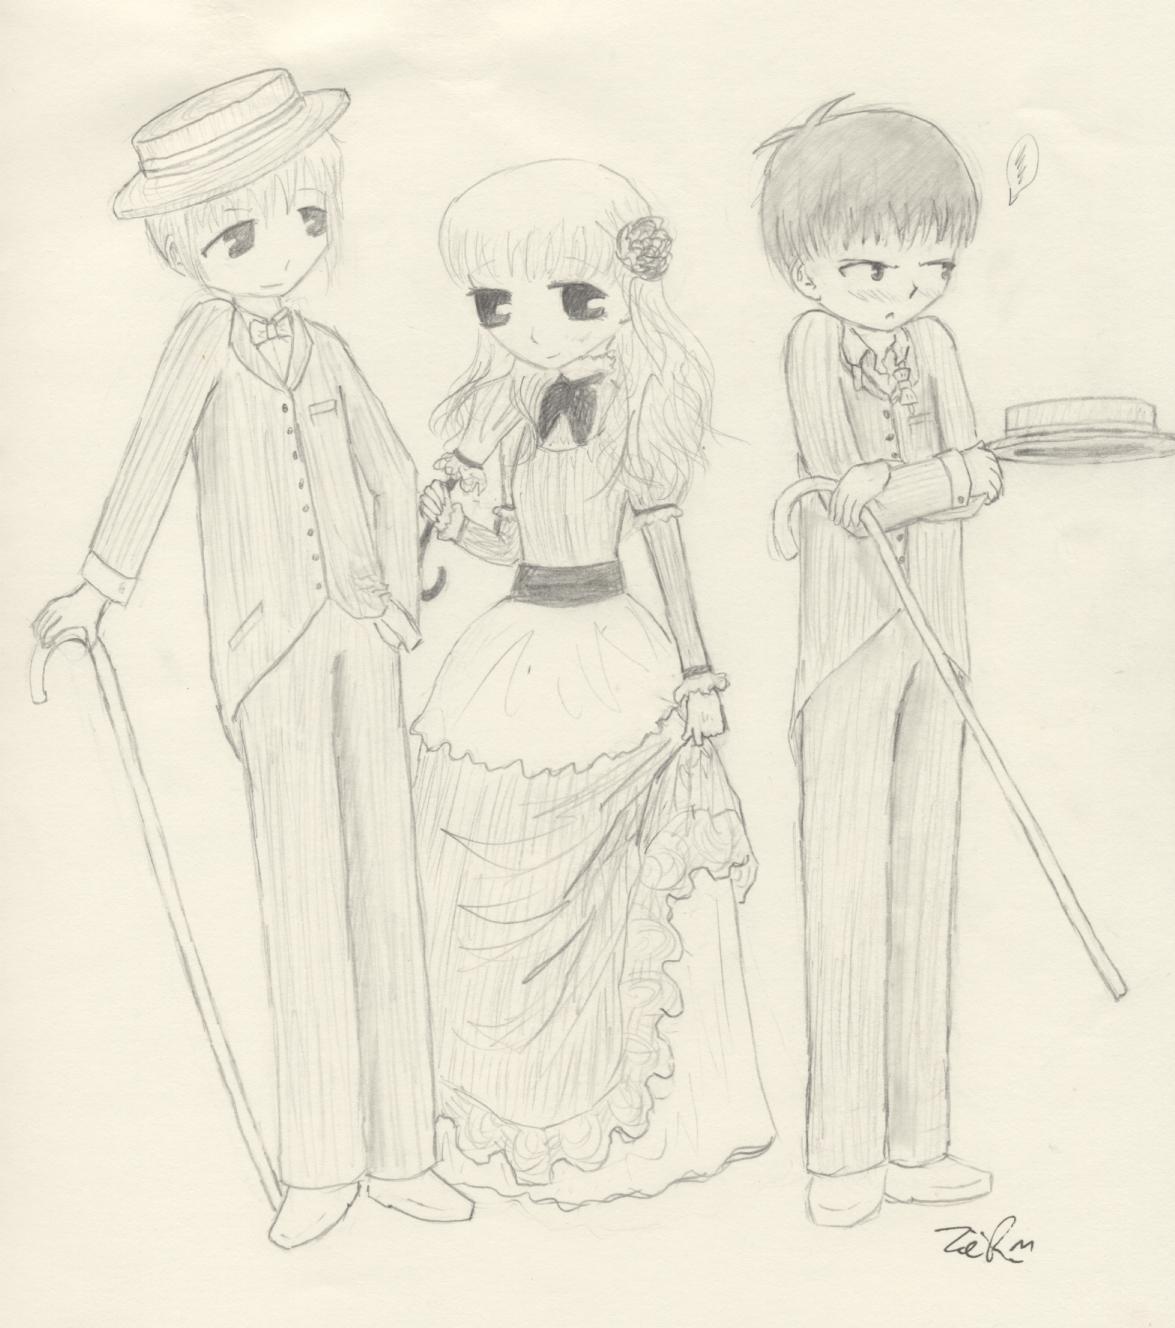 Tohru, Yuki, and Kyo in cool costumes by Kaede-chan